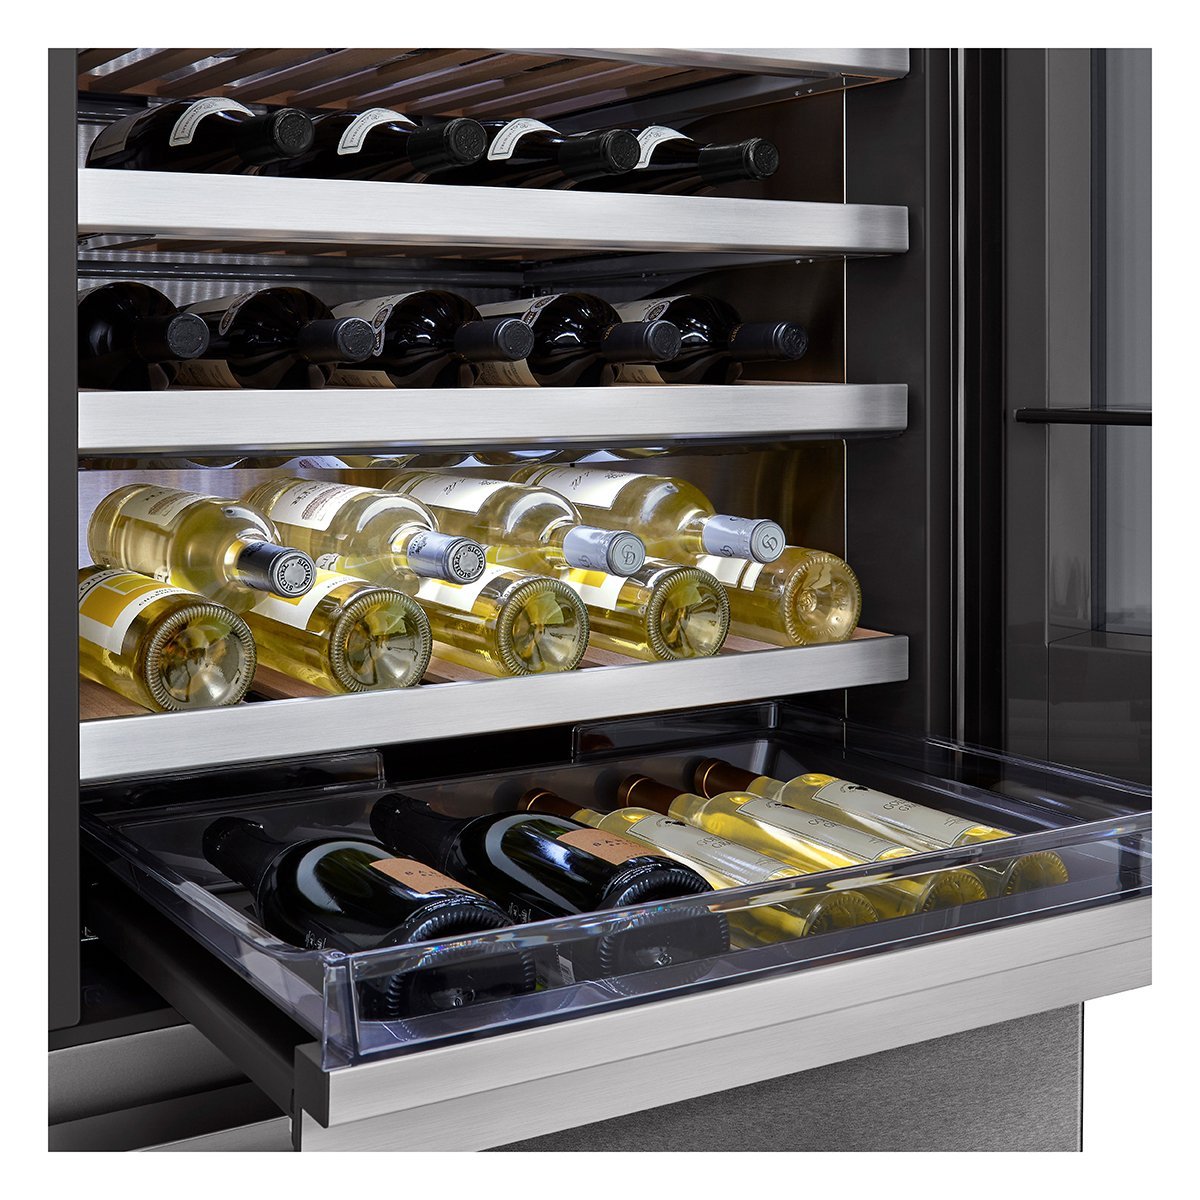 LG Signature LSR200W, 65 Bottle Freestanding, InstaView™ Wine Cooler in Stainless Steel - Signature Retail Stores